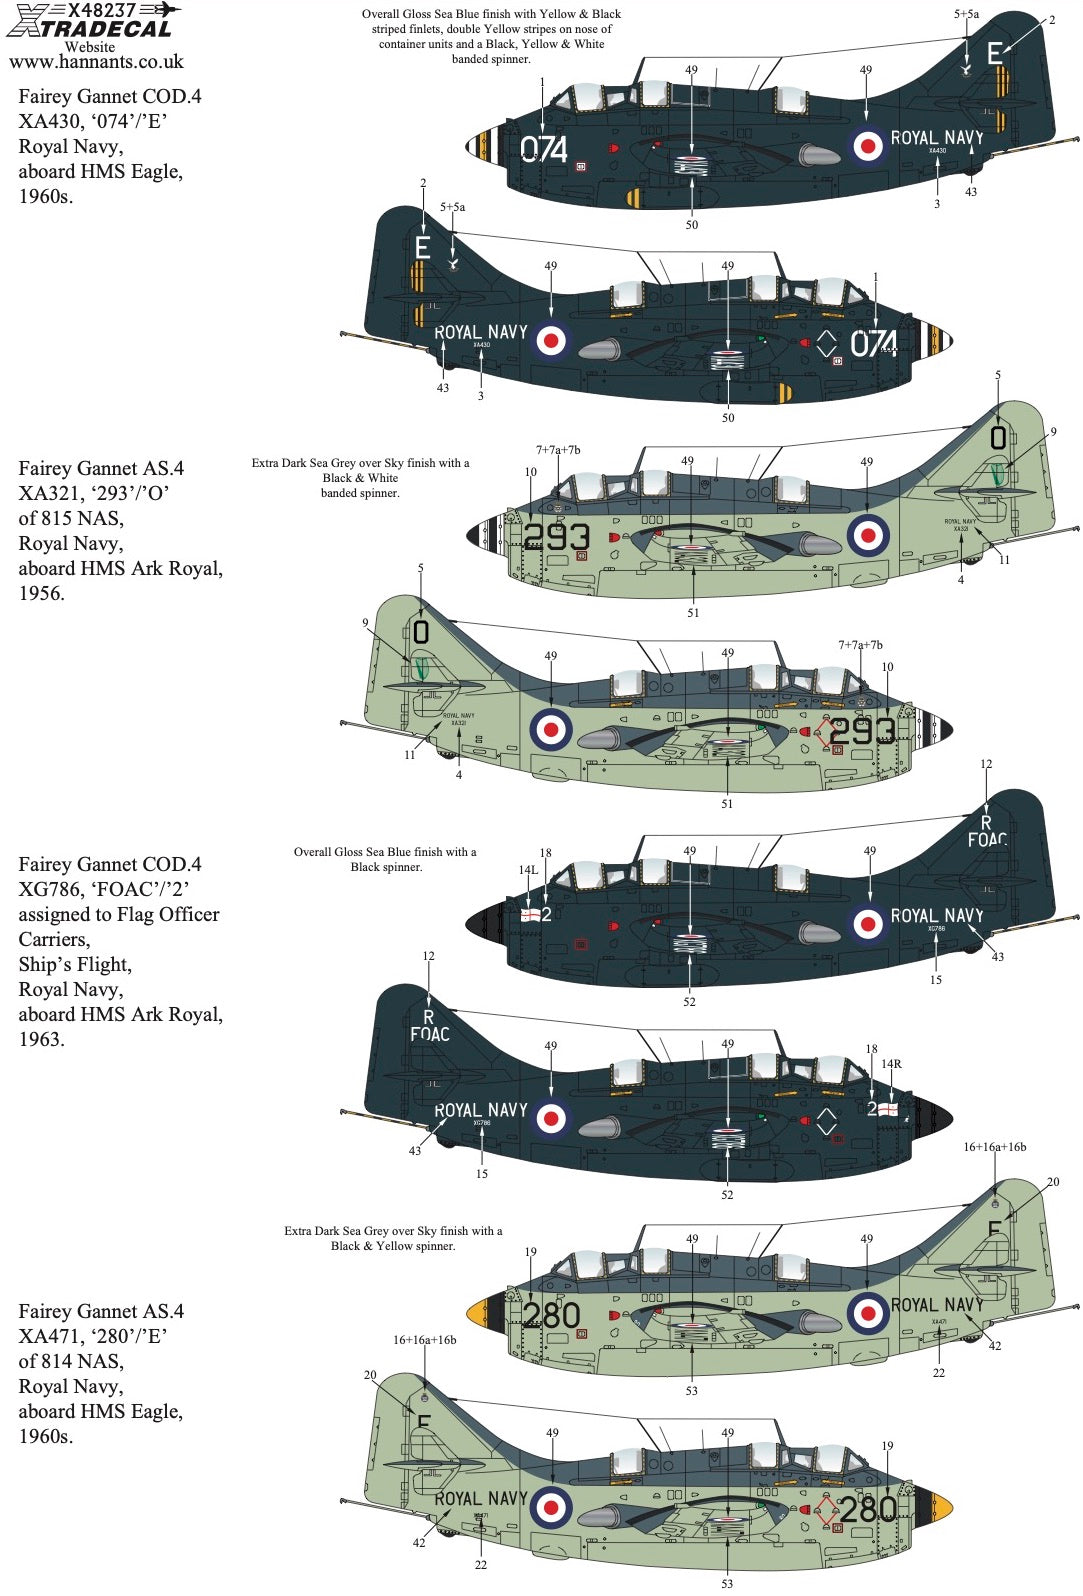 1:48 Fairey Gannet COD.4/AS.4/T.2/T.5 Decals X48237 Xtradecal